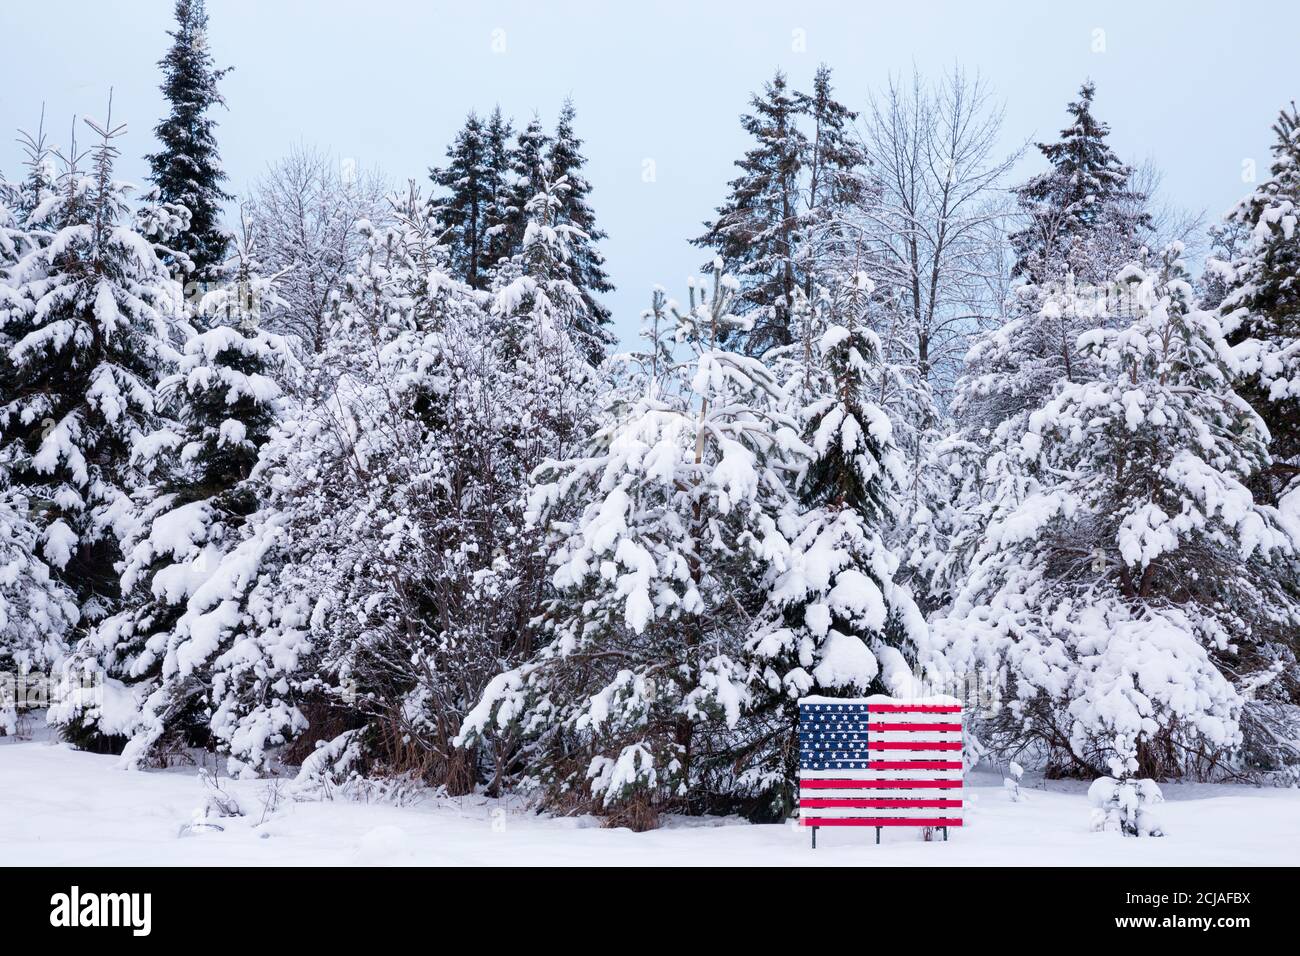 Wood constructed United States flag in front of snowy conifers, Escanaba, Michigan, USA. Stock Photo